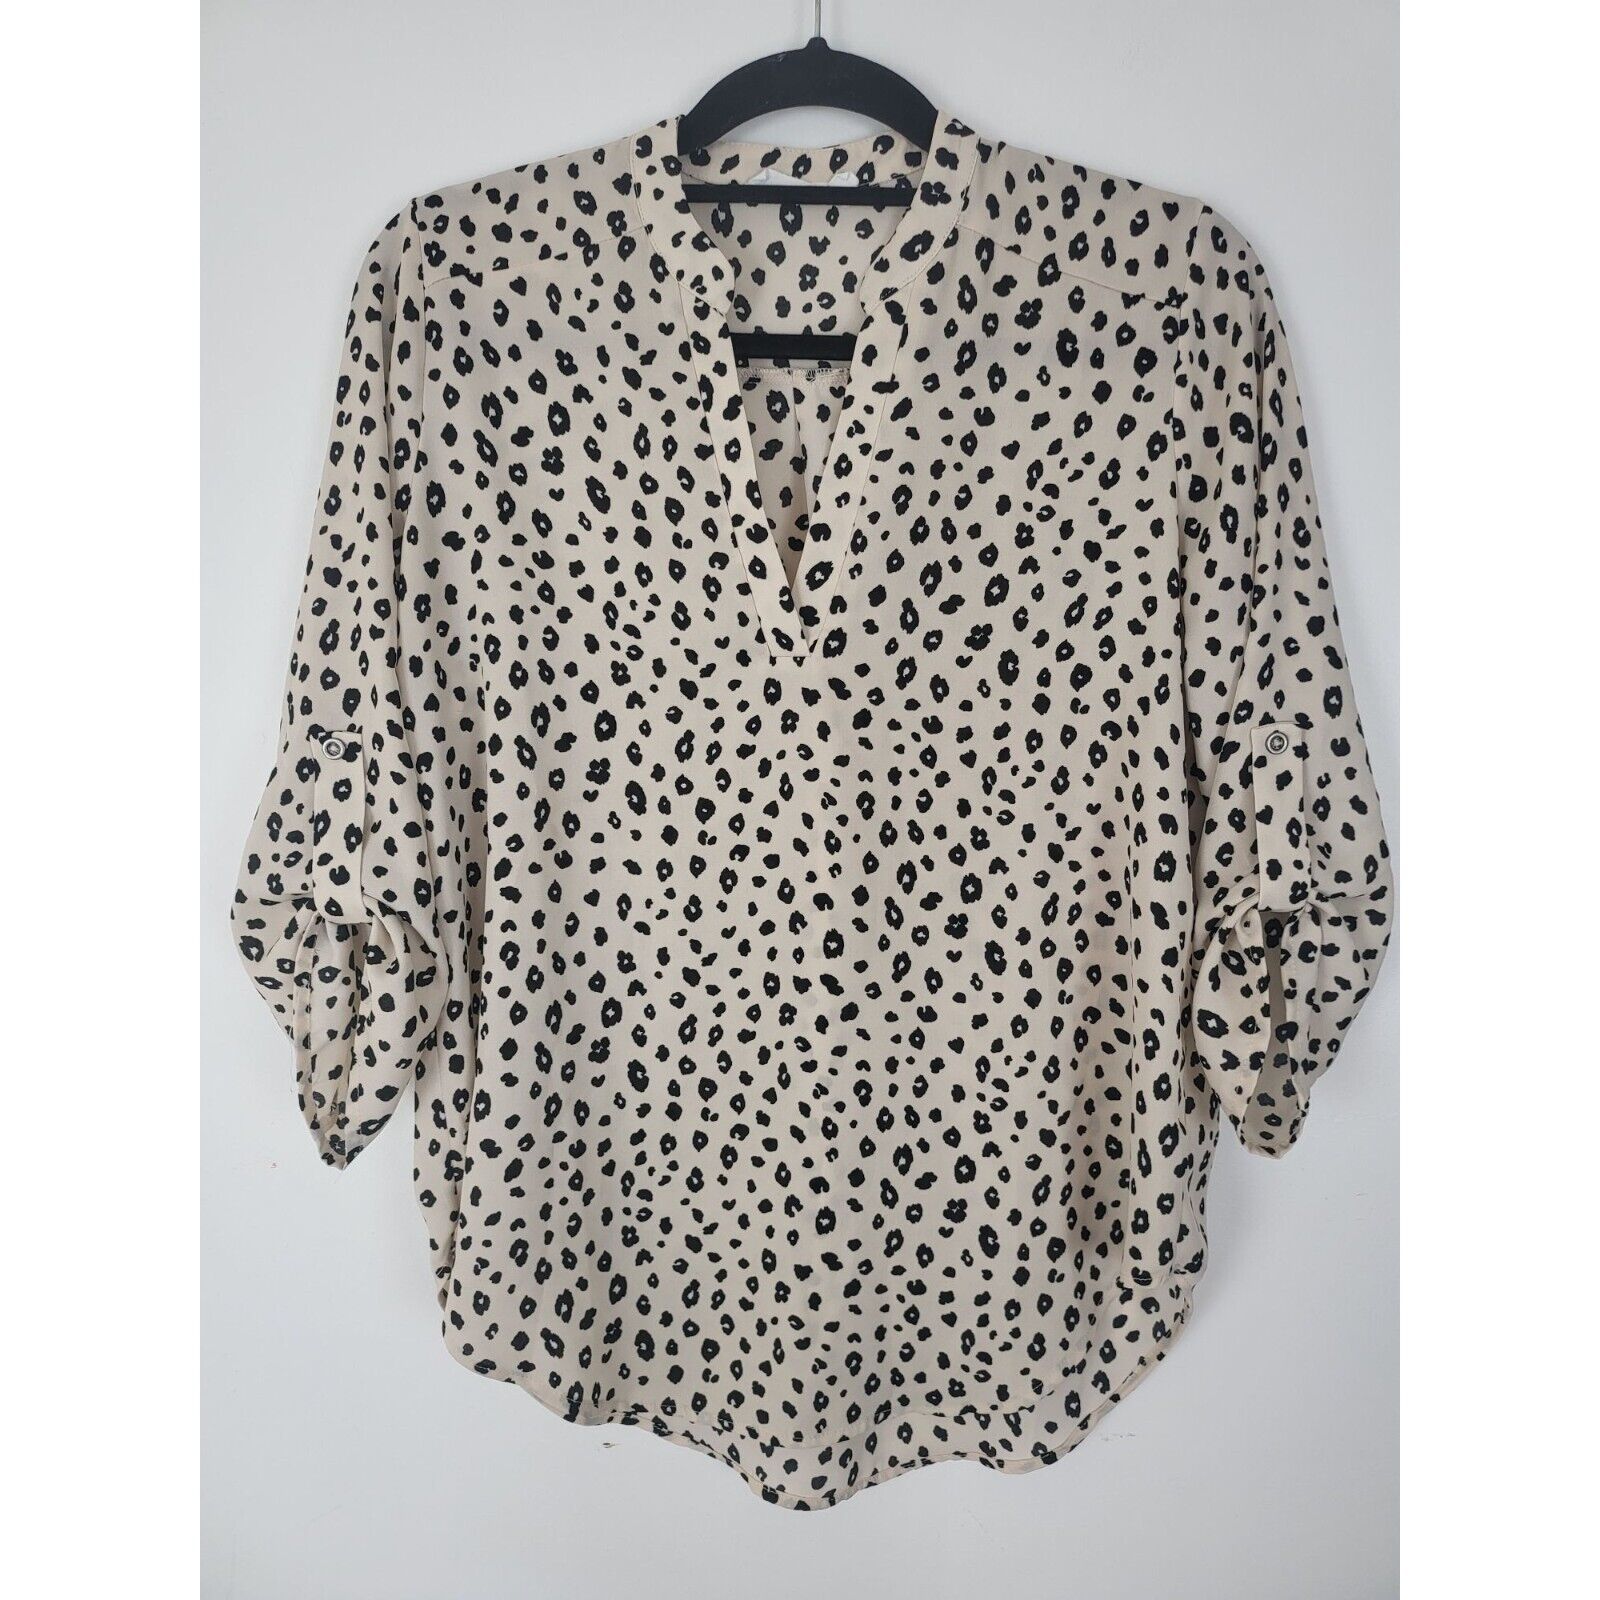 Primary image for Lush Blouse Small Womens 3/4 Roll Tab Sleeve Cream Black Animal Print V Neck